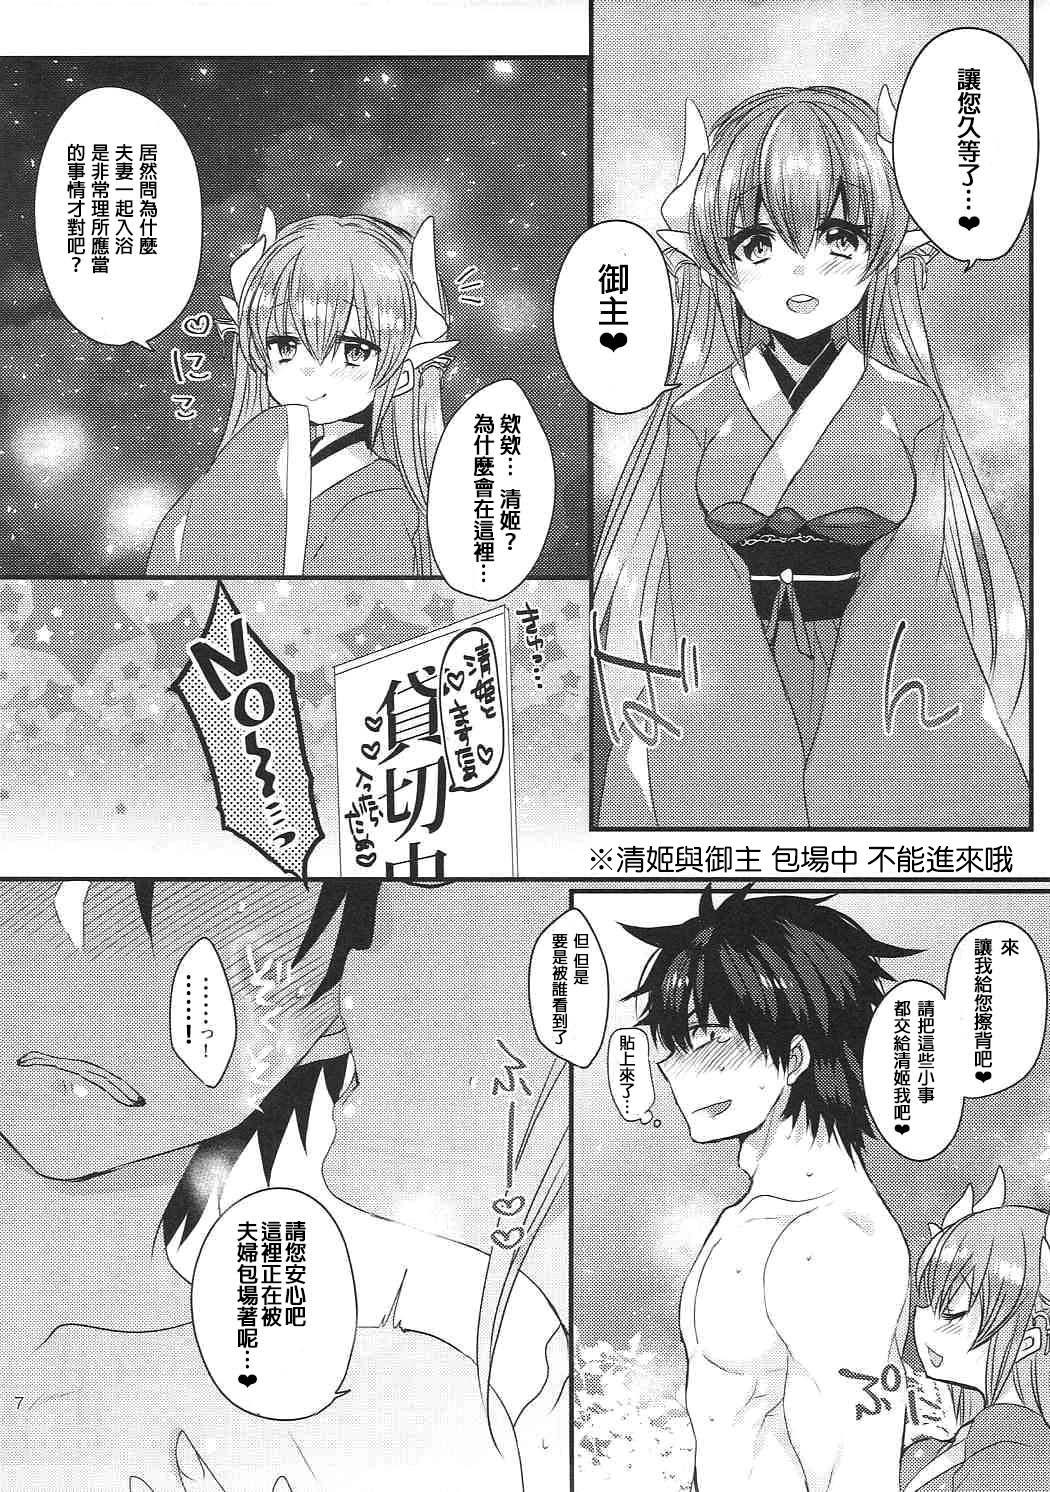 Topless Kiyohime to Love Love Ofuro Time - Fate grand order Strip - Page 7